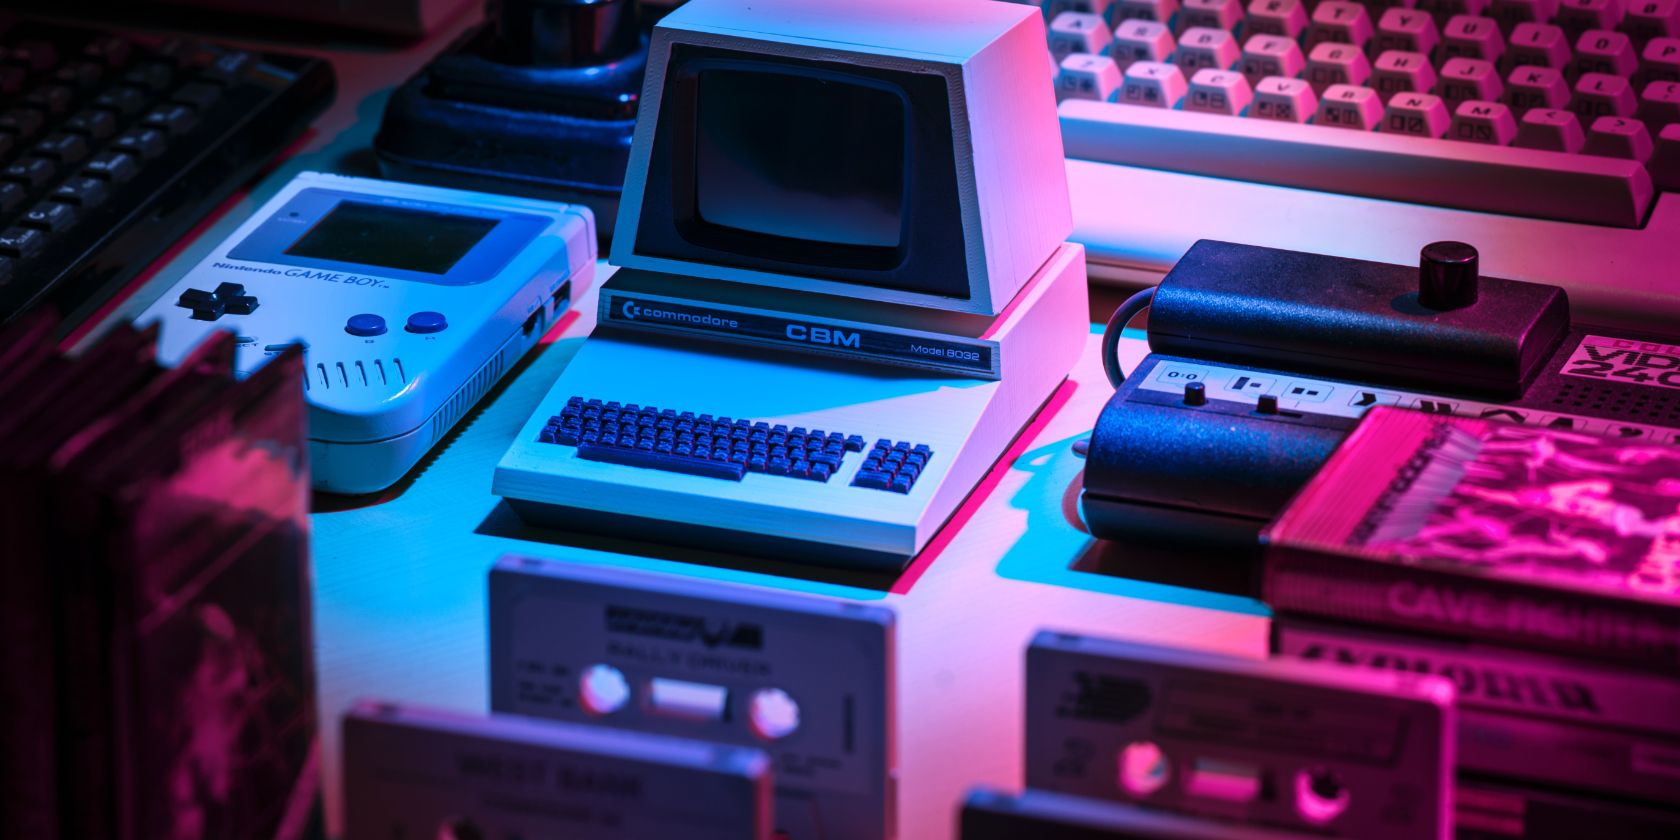 Retro games consoles spread out on table